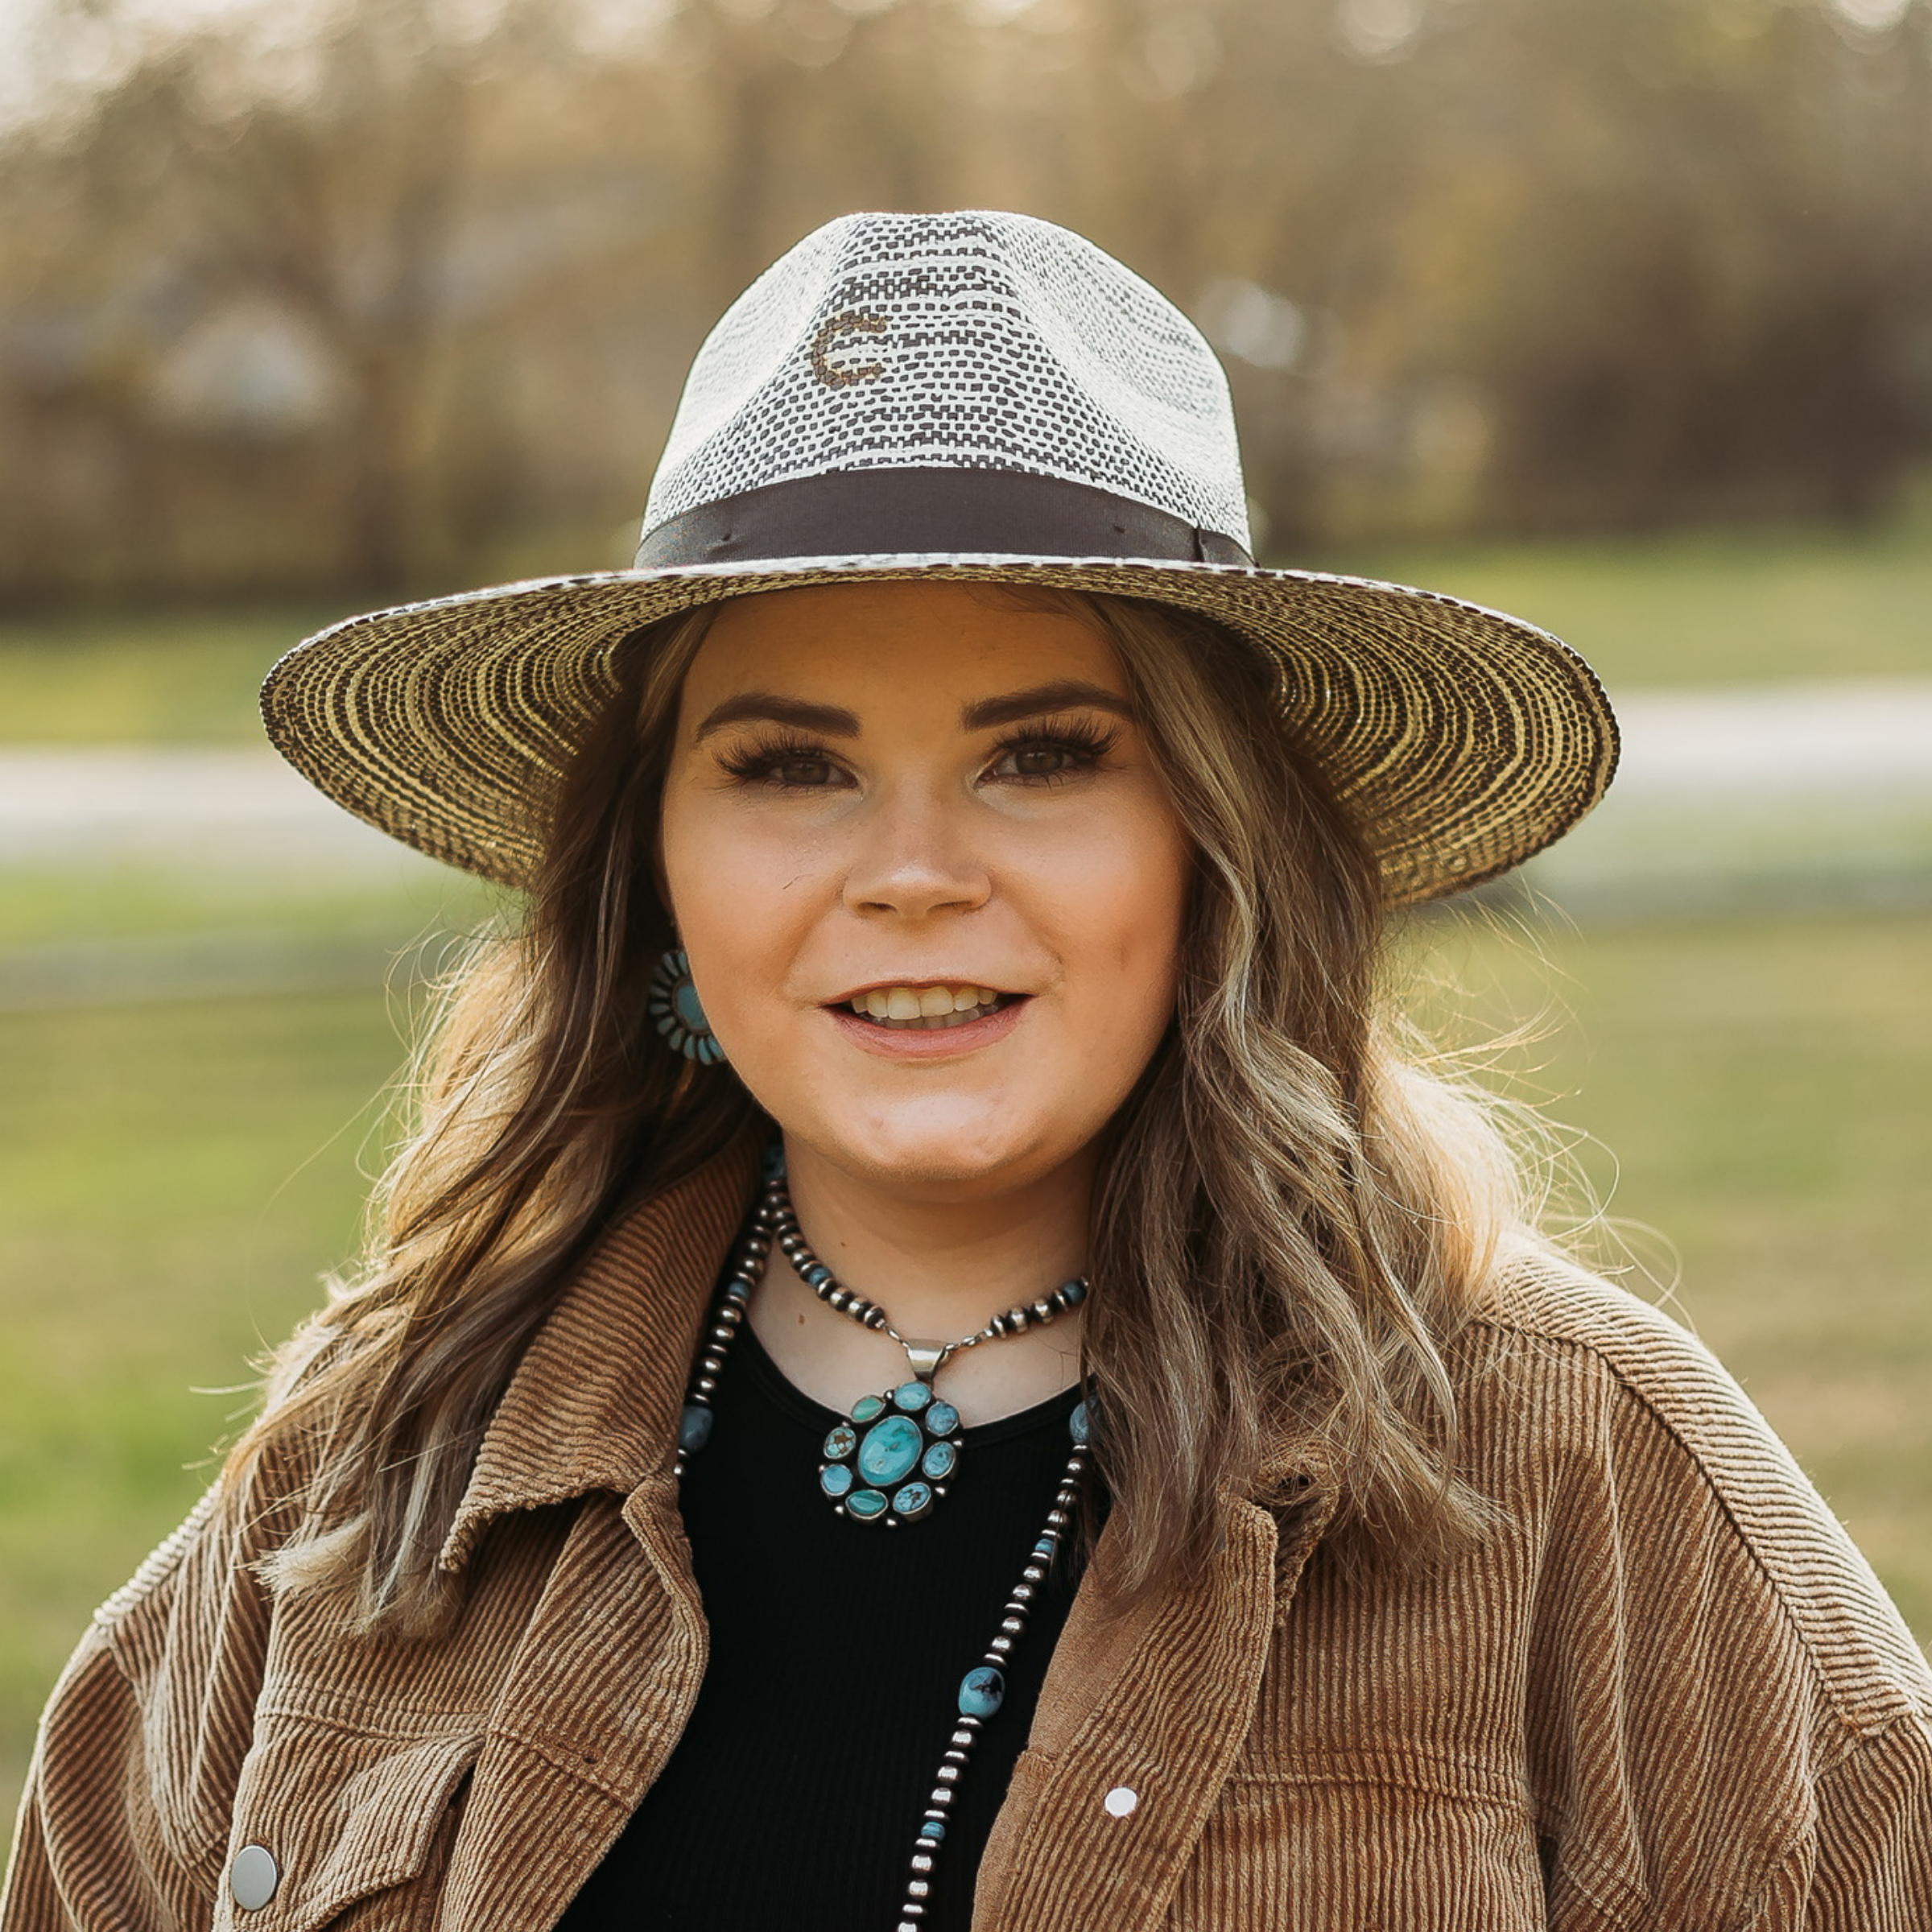 Black and White Straw Hat with Black Hat Band and Charlie 1 Horse Pin. Model has it paired with a brown jacket and turquoise jewelry. Pictured on wooded background